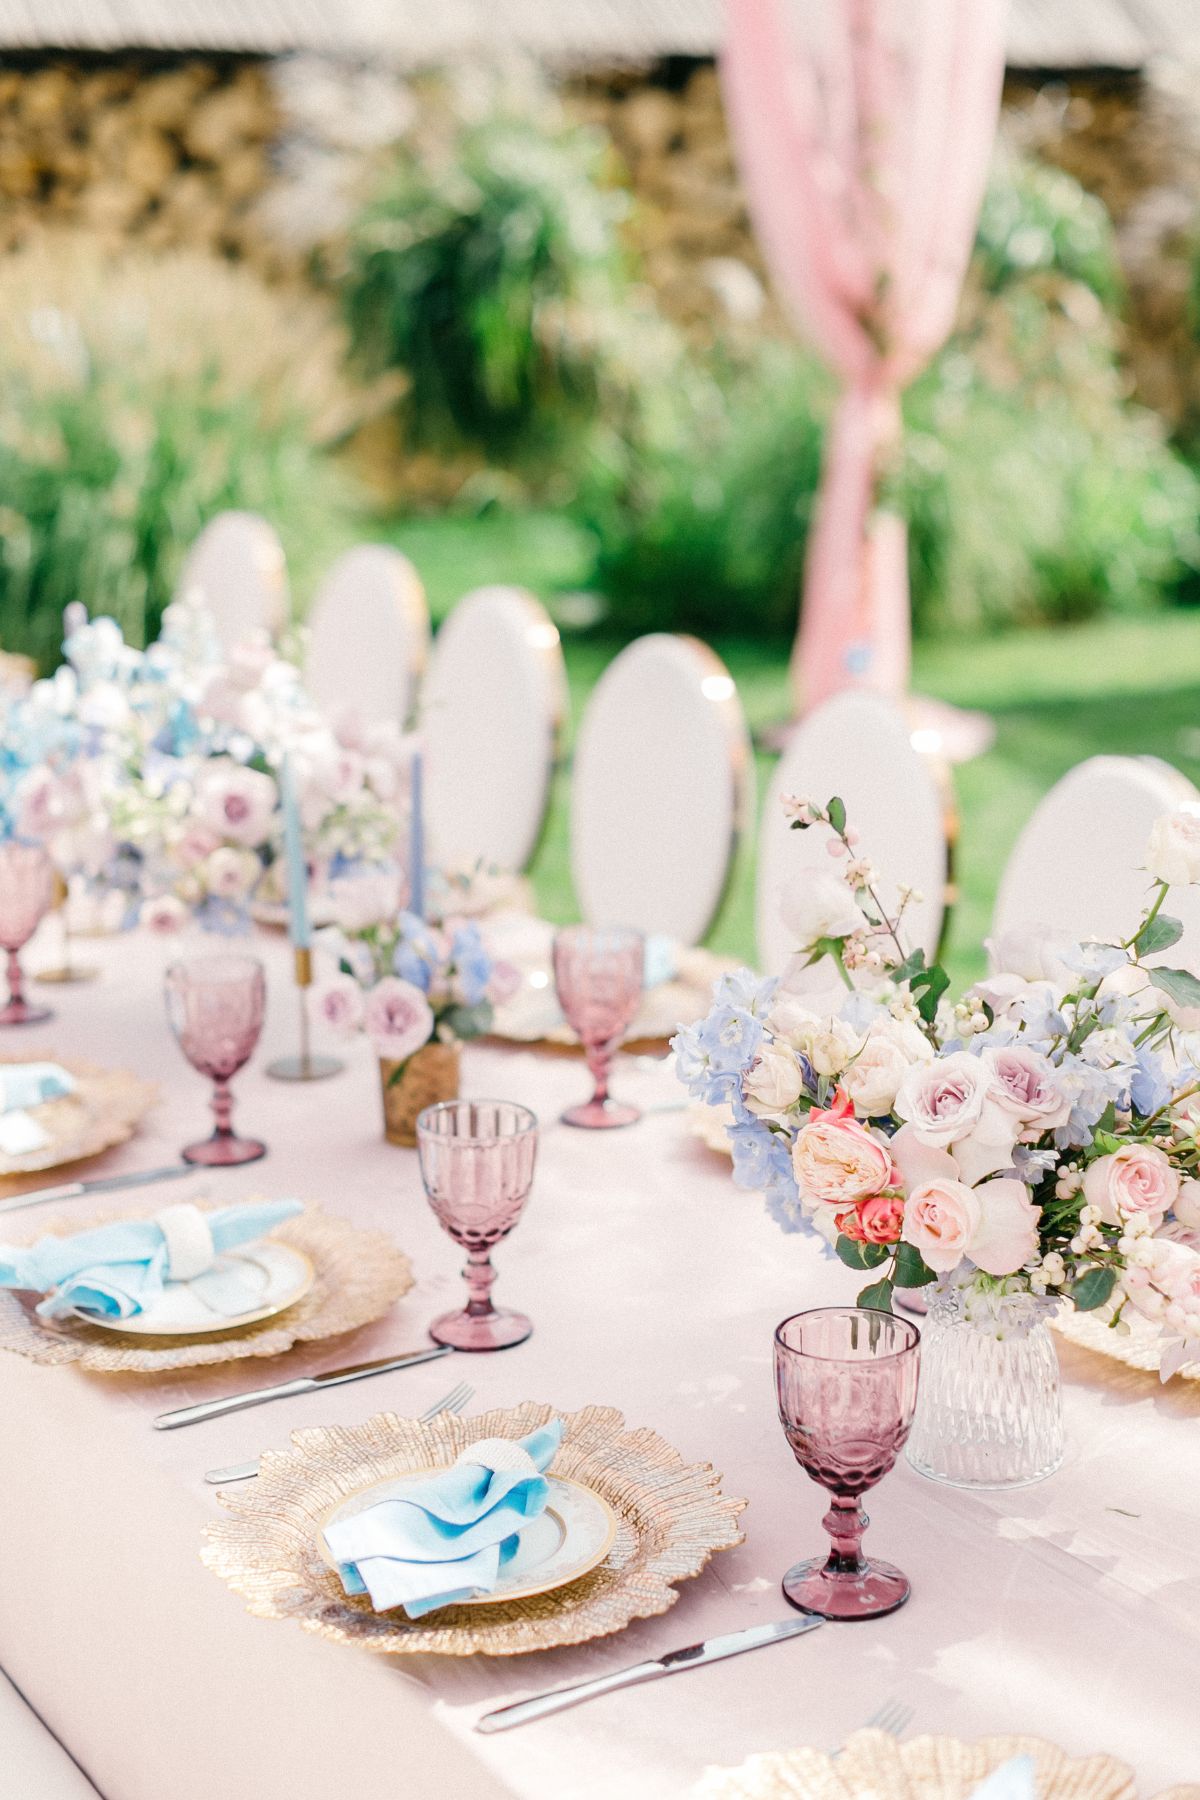 Intimate Wedding: How To Make It Luxurious